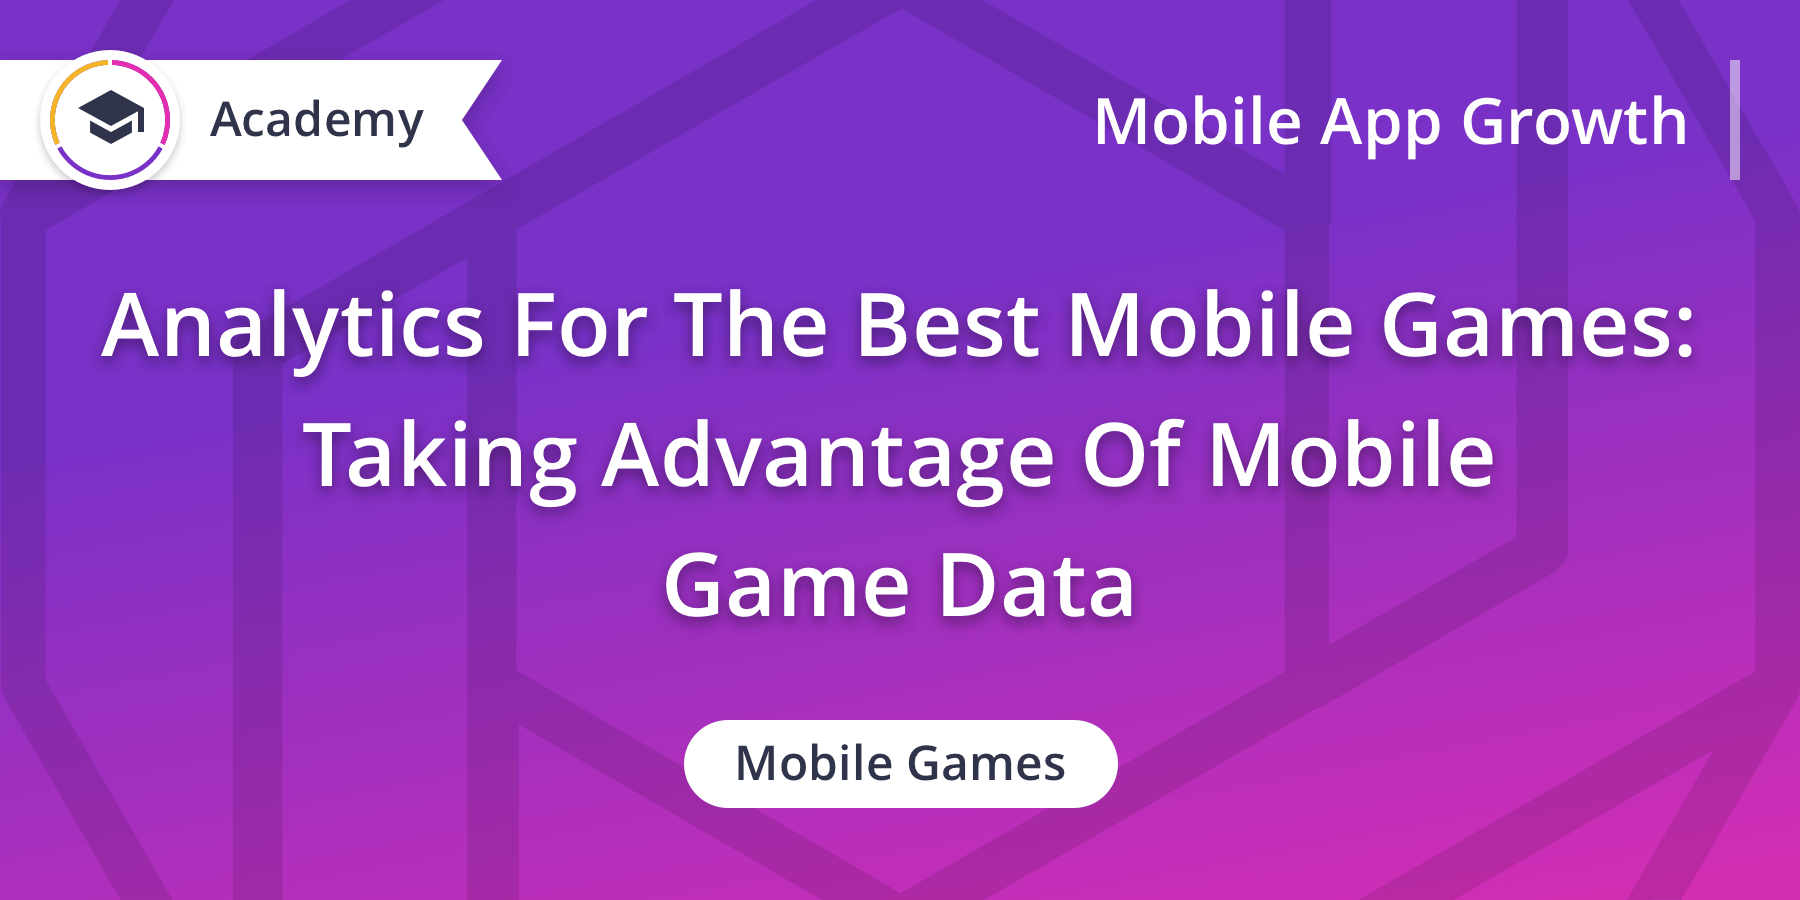 Analytics For The Best Mobile Games: Taking Advantage Of Mobile Game Data